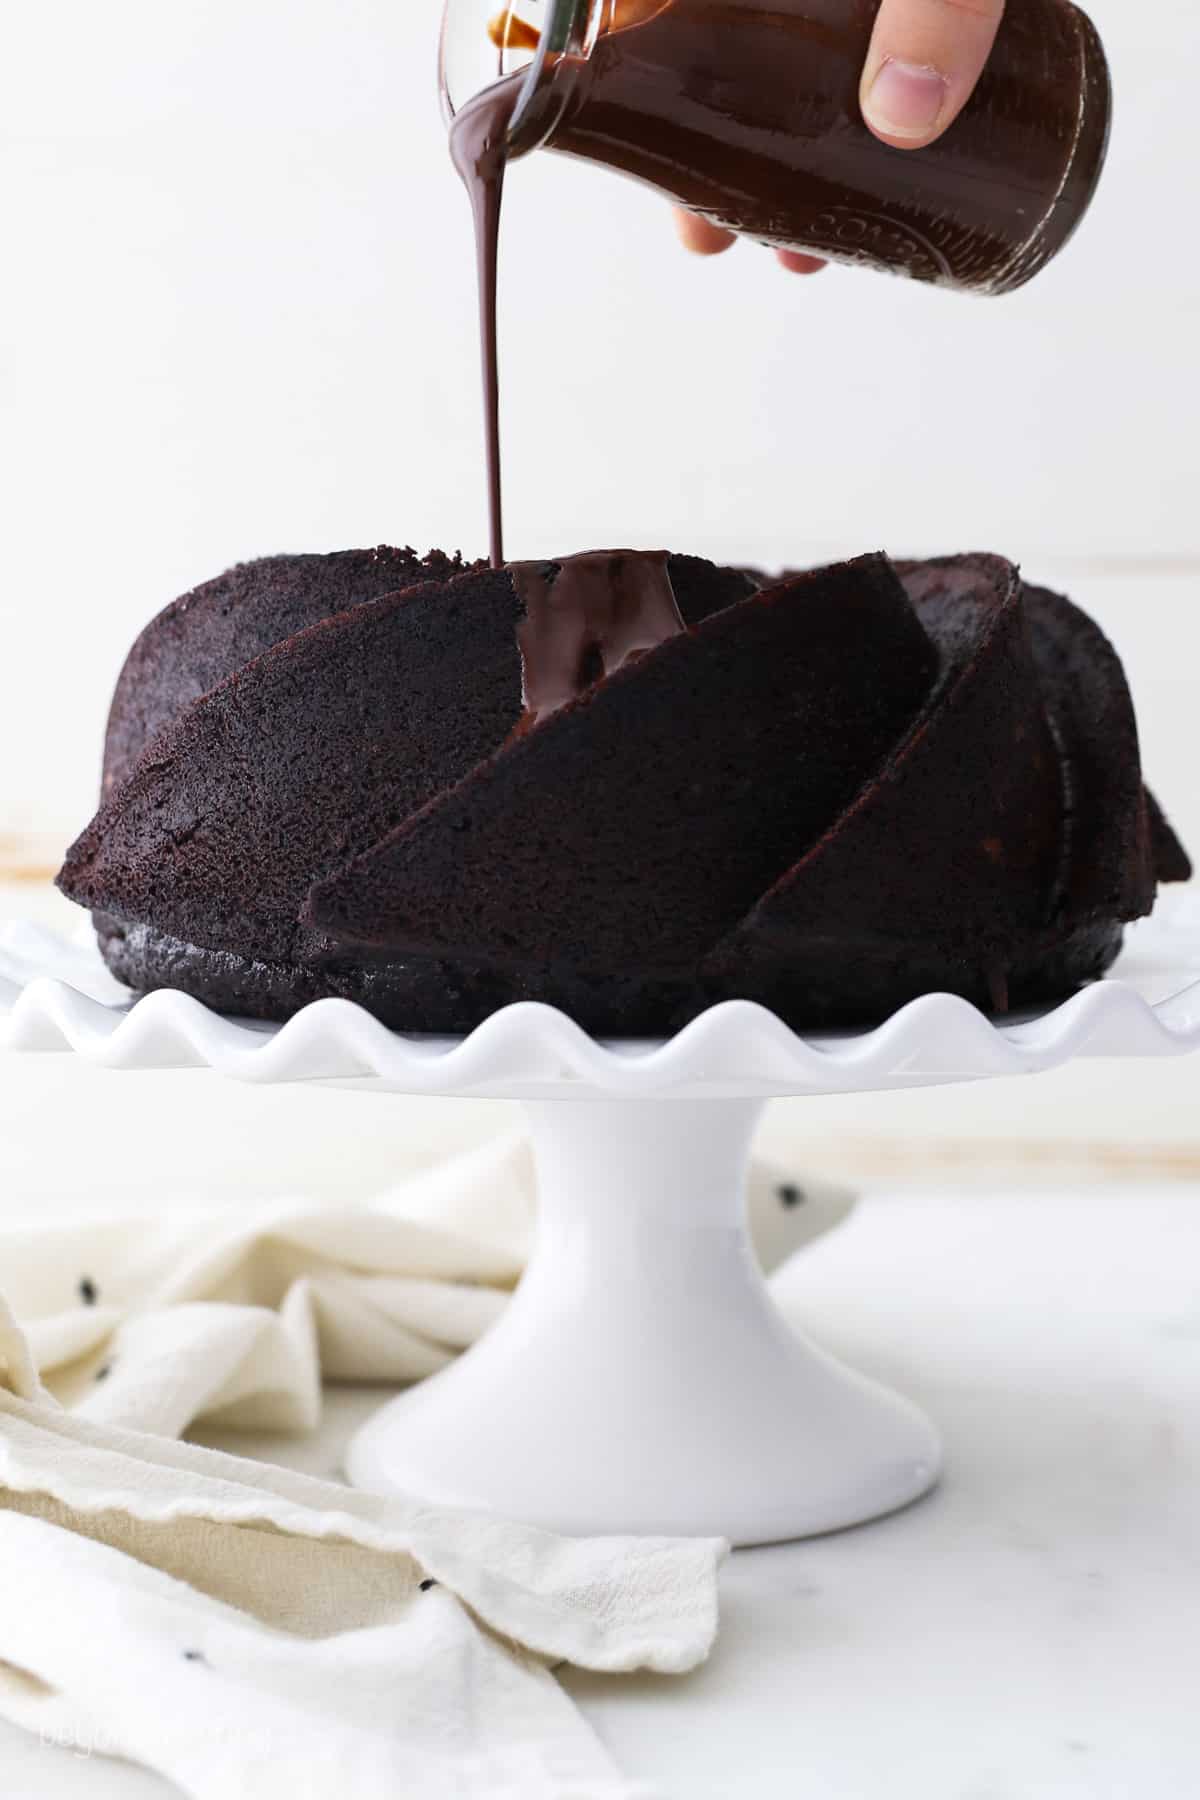 A hand pouring chocolate ganache over a chocolate bundt cake on a white cake stand.